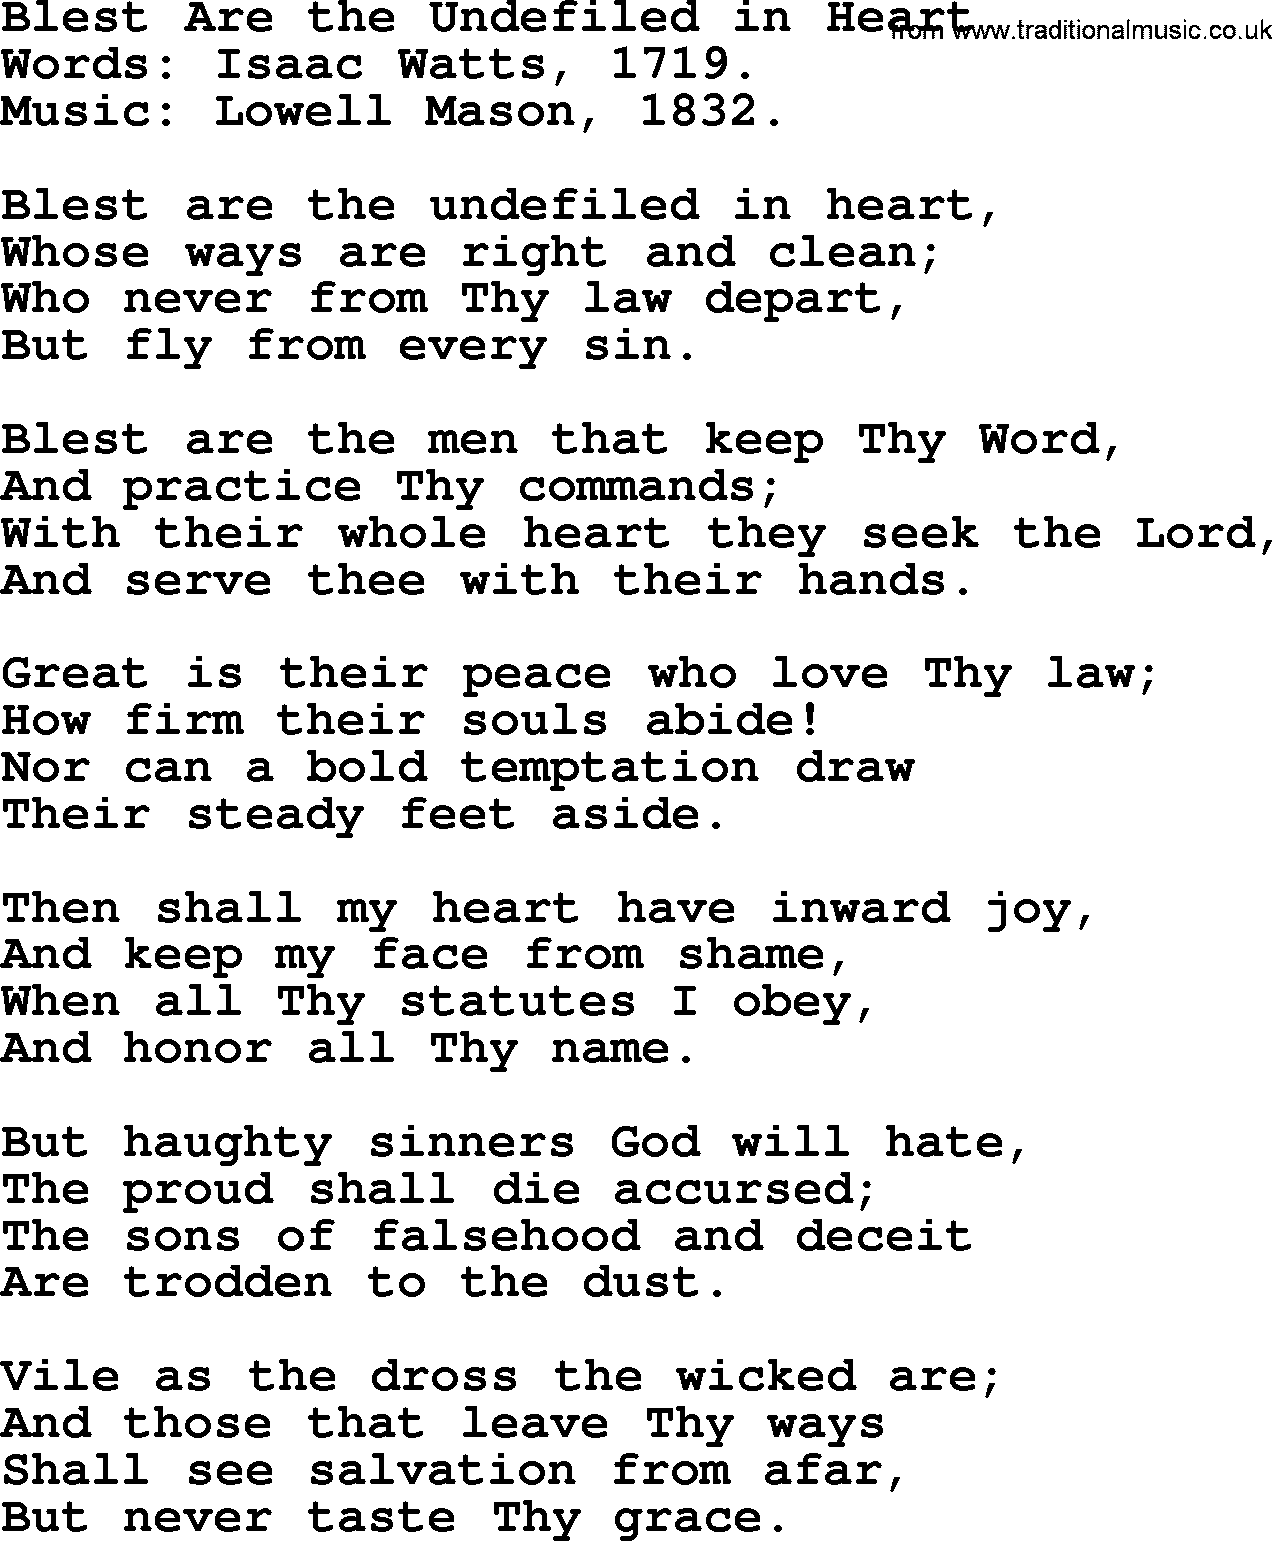 Isaac Watts Christian hymn: Blest Are the Undefiled in Heart- lyricss